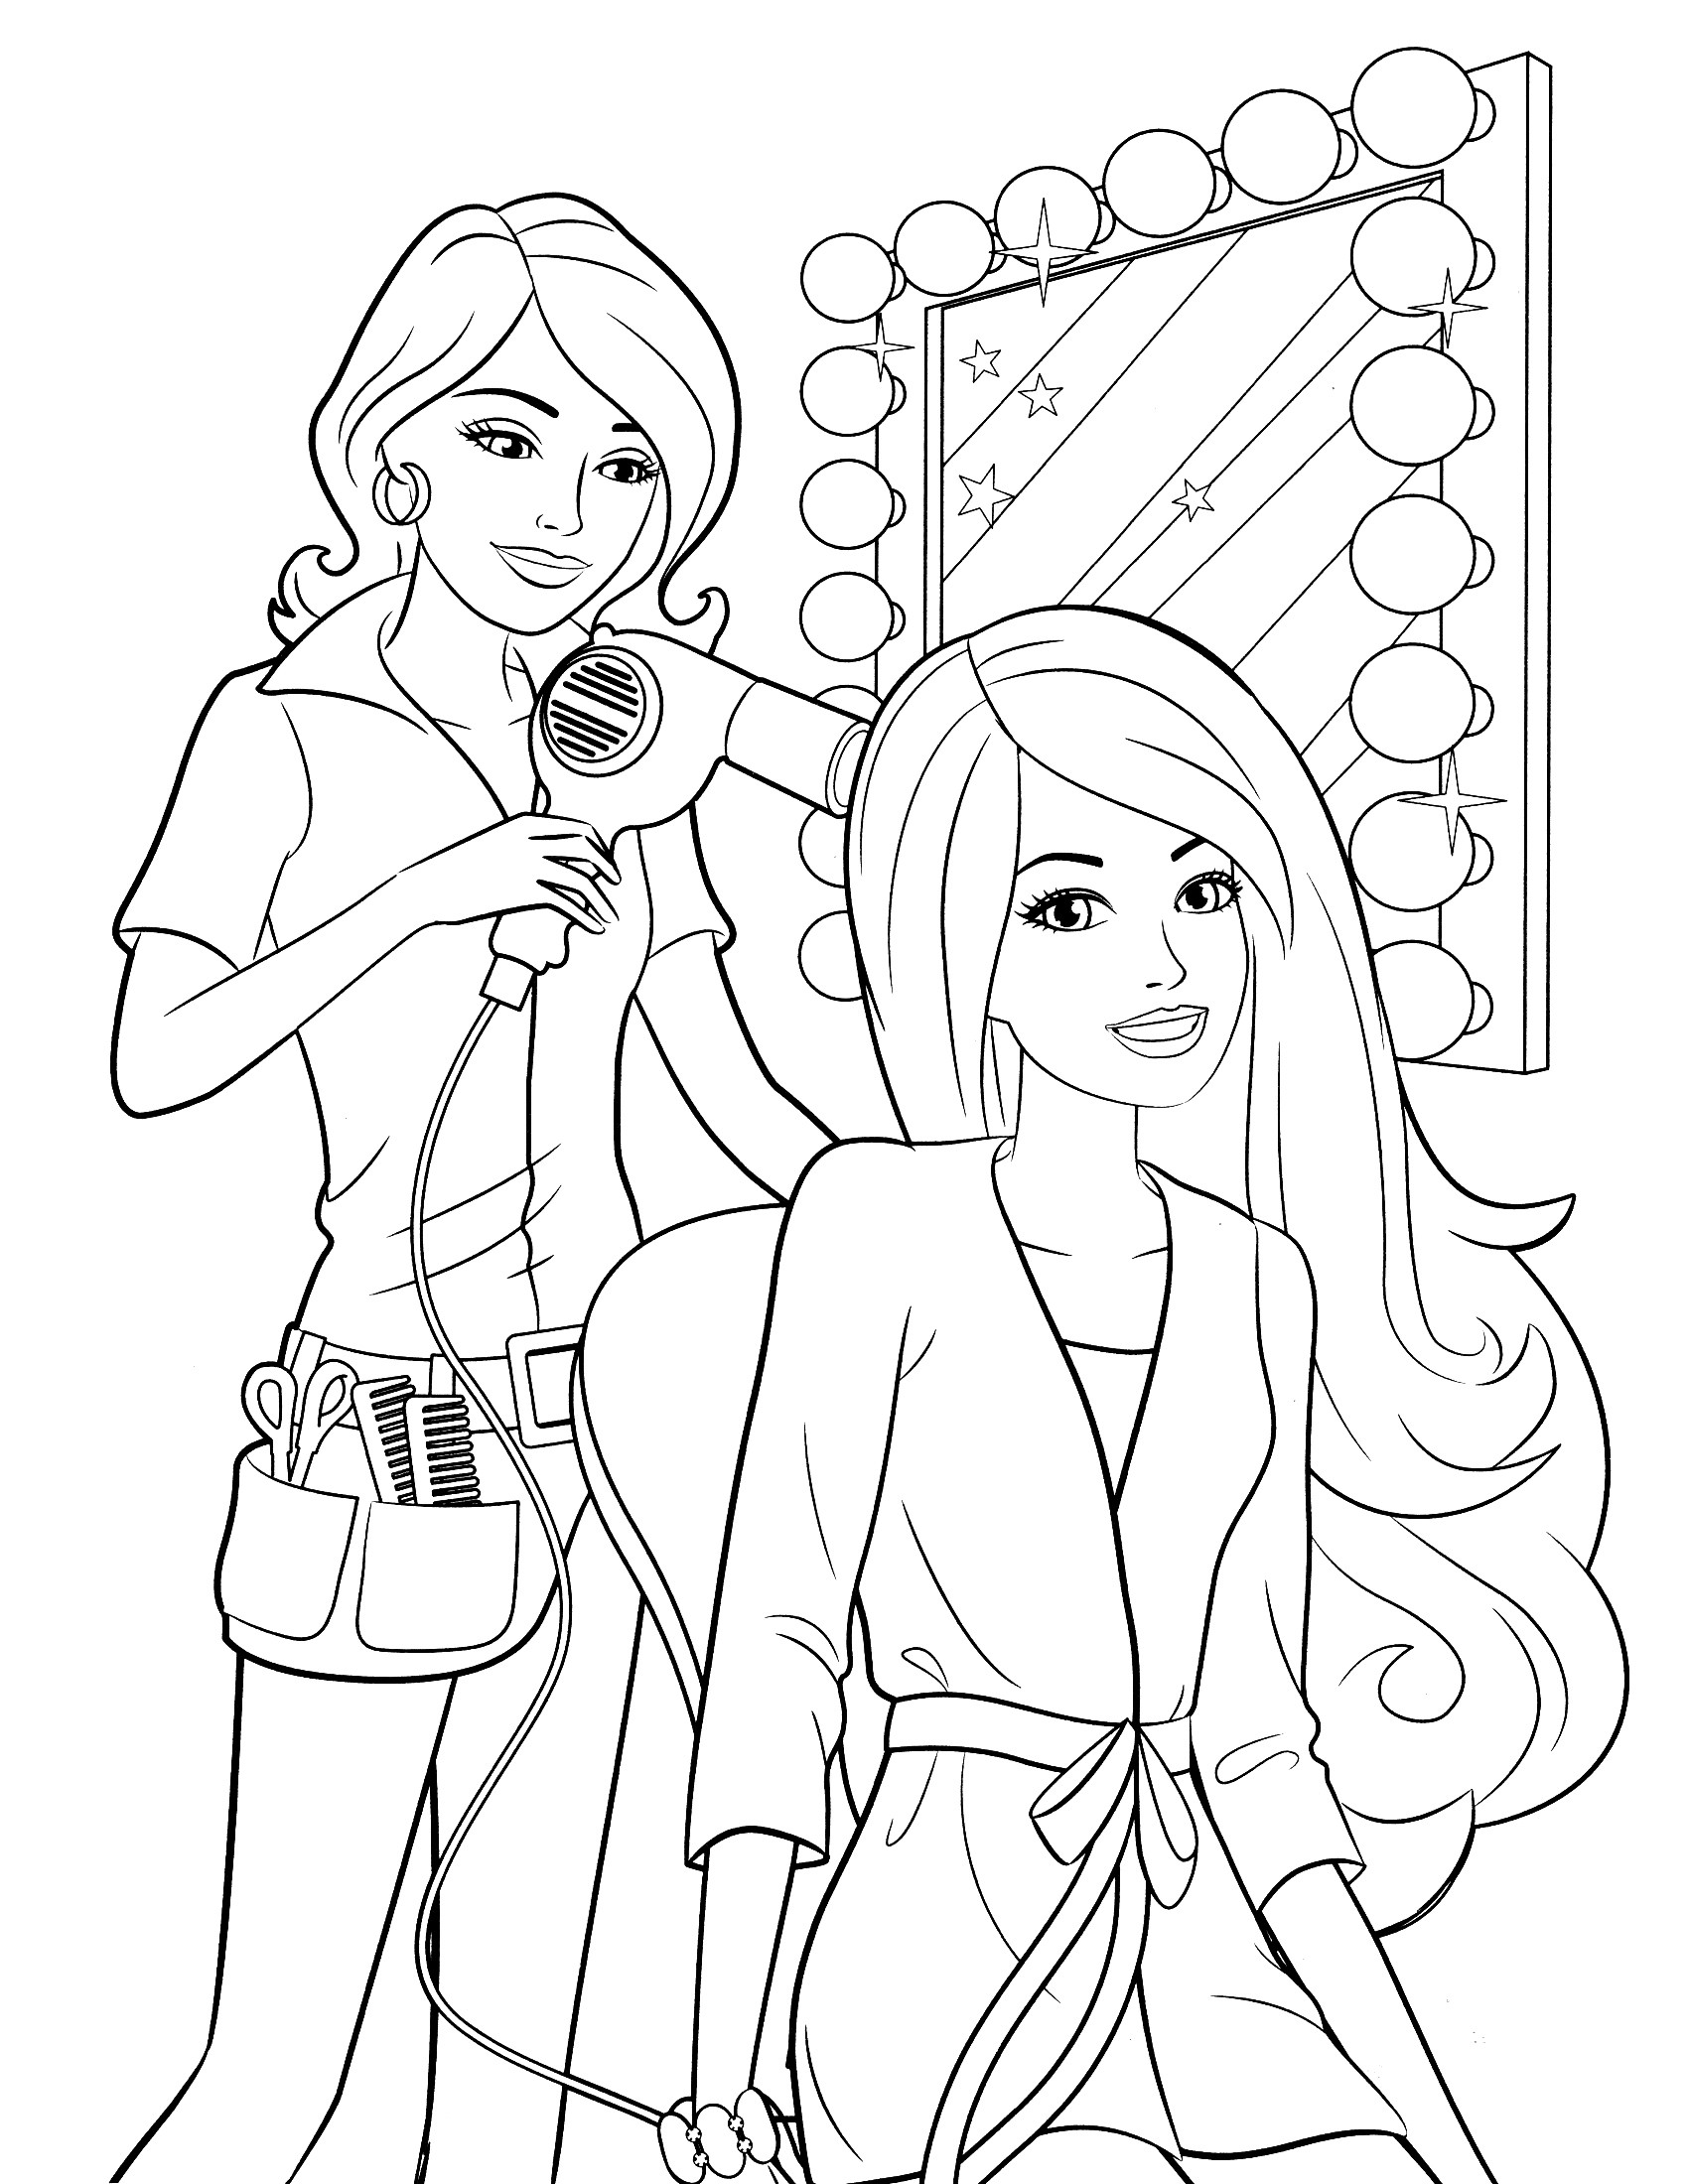 Coloring Pages For Girls Barbie
 Barbie coloring pages for girls timeless miracle